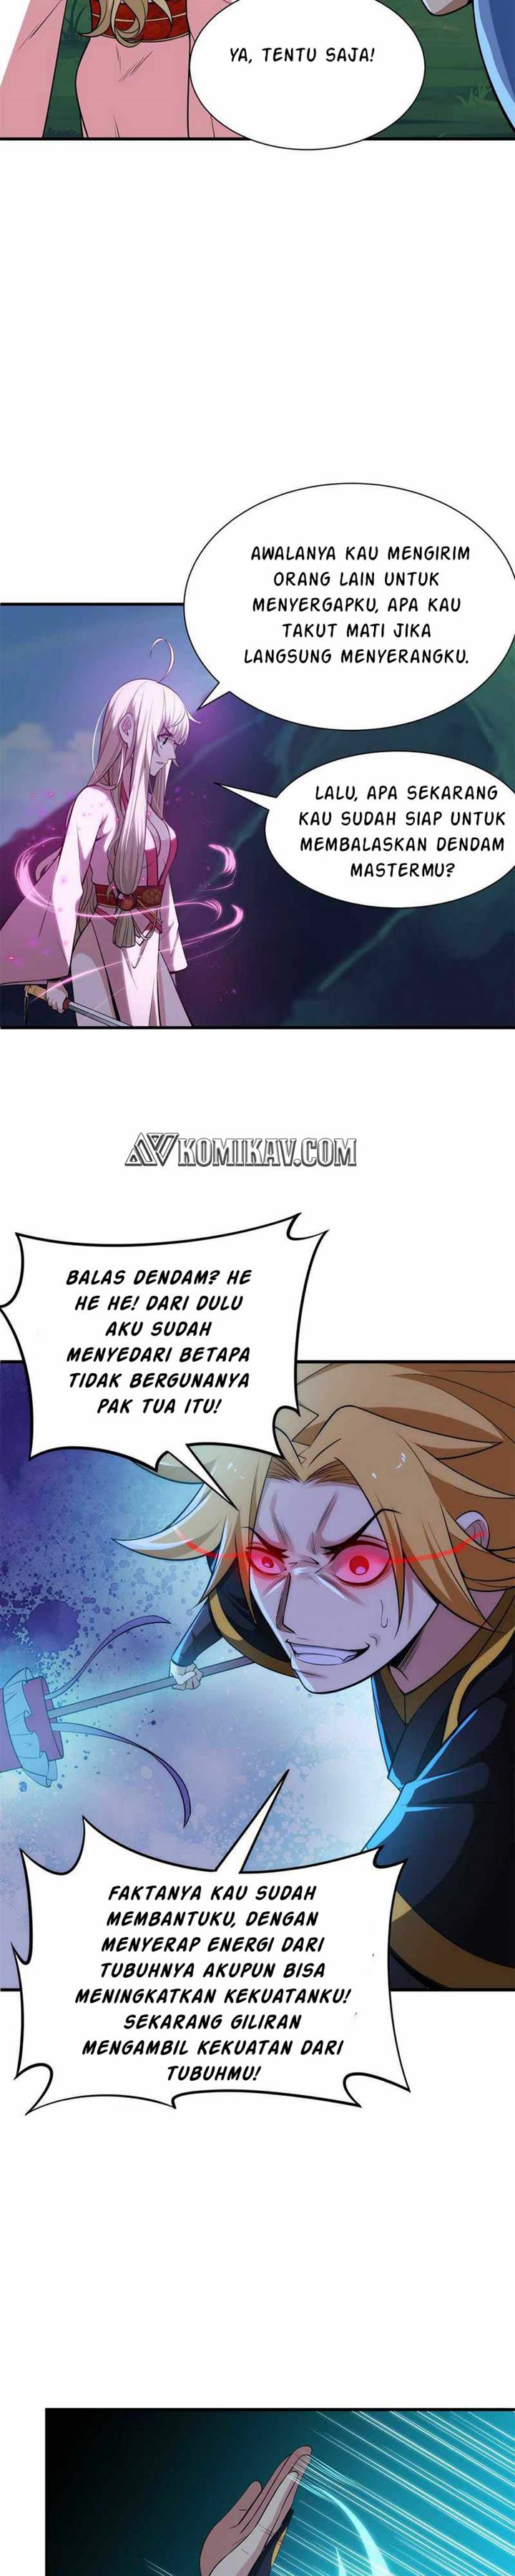 Dilarang COPAS - situs resmi www.mangacanblog.com - Komik i just want to be beaten to death by everyone 023 - chapter 23 24 Indonesia i just want to be beaten to death by everyone 023 - chapter 23 Terbaru 11|Baca Manga Komik Indonesia|Mangacan